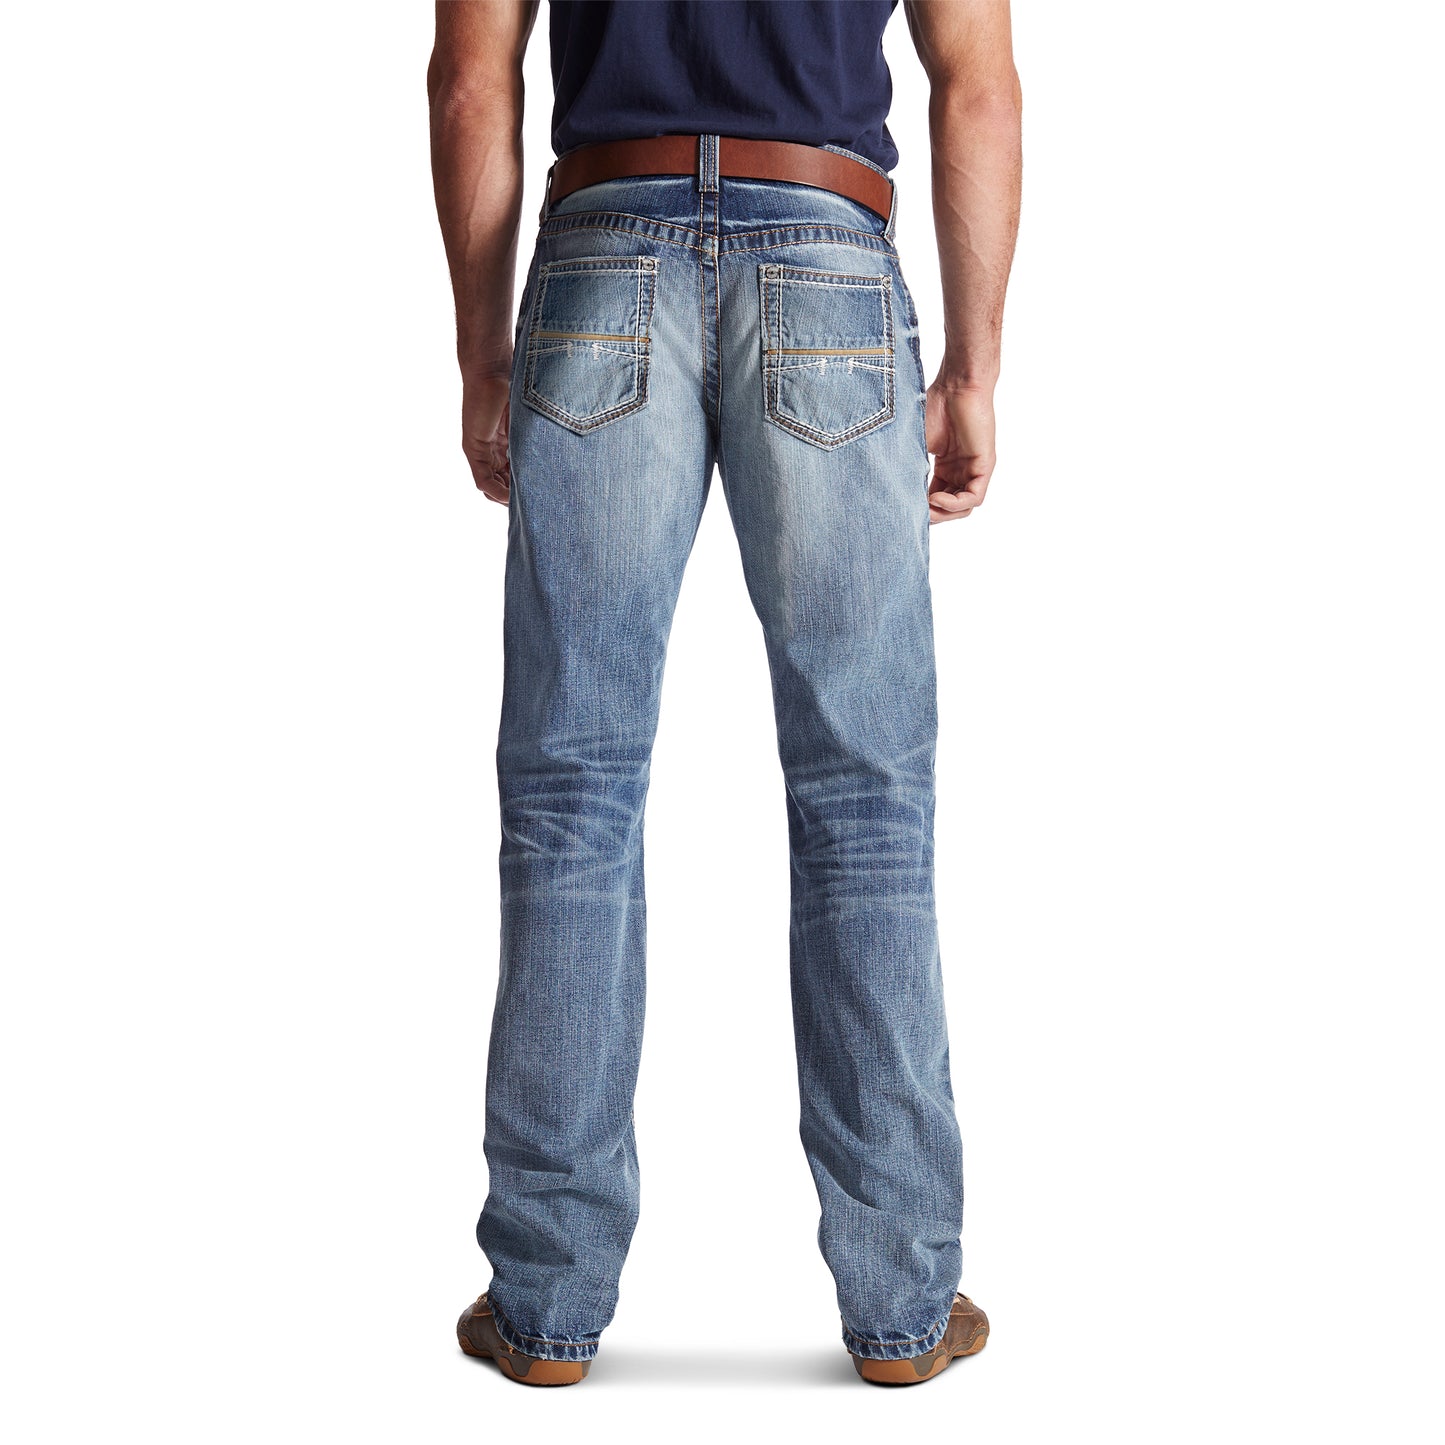 Ariat® Men's M4 Low Rise Relaxed Fit Coltrane Boot Cut Jeans 10017511 - Wild West Boot Store